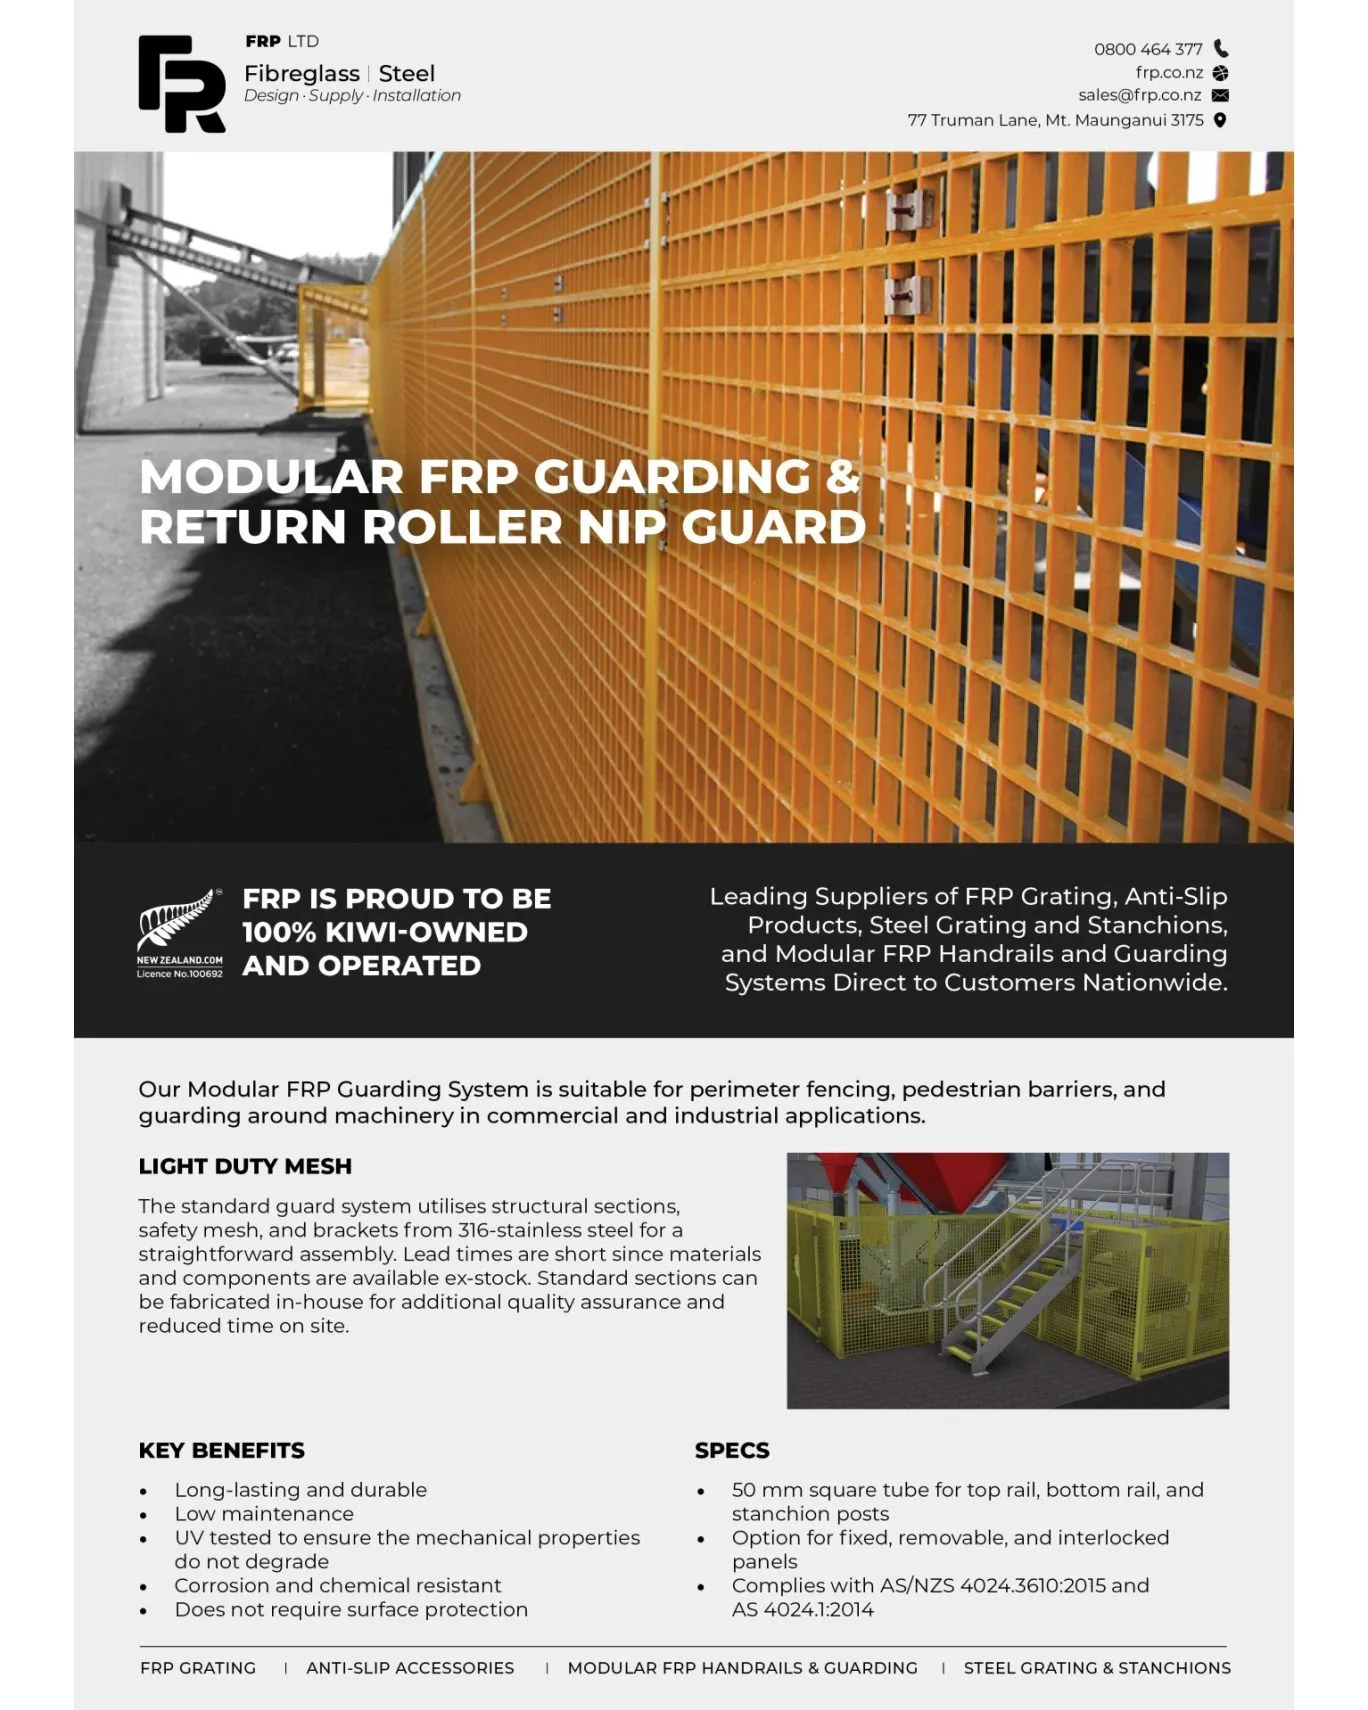 Enquire to FRP modular safety guarding today.

#frp #frpproducts #industrial #commercial #guarding #machinery #safety #engineers #engineering